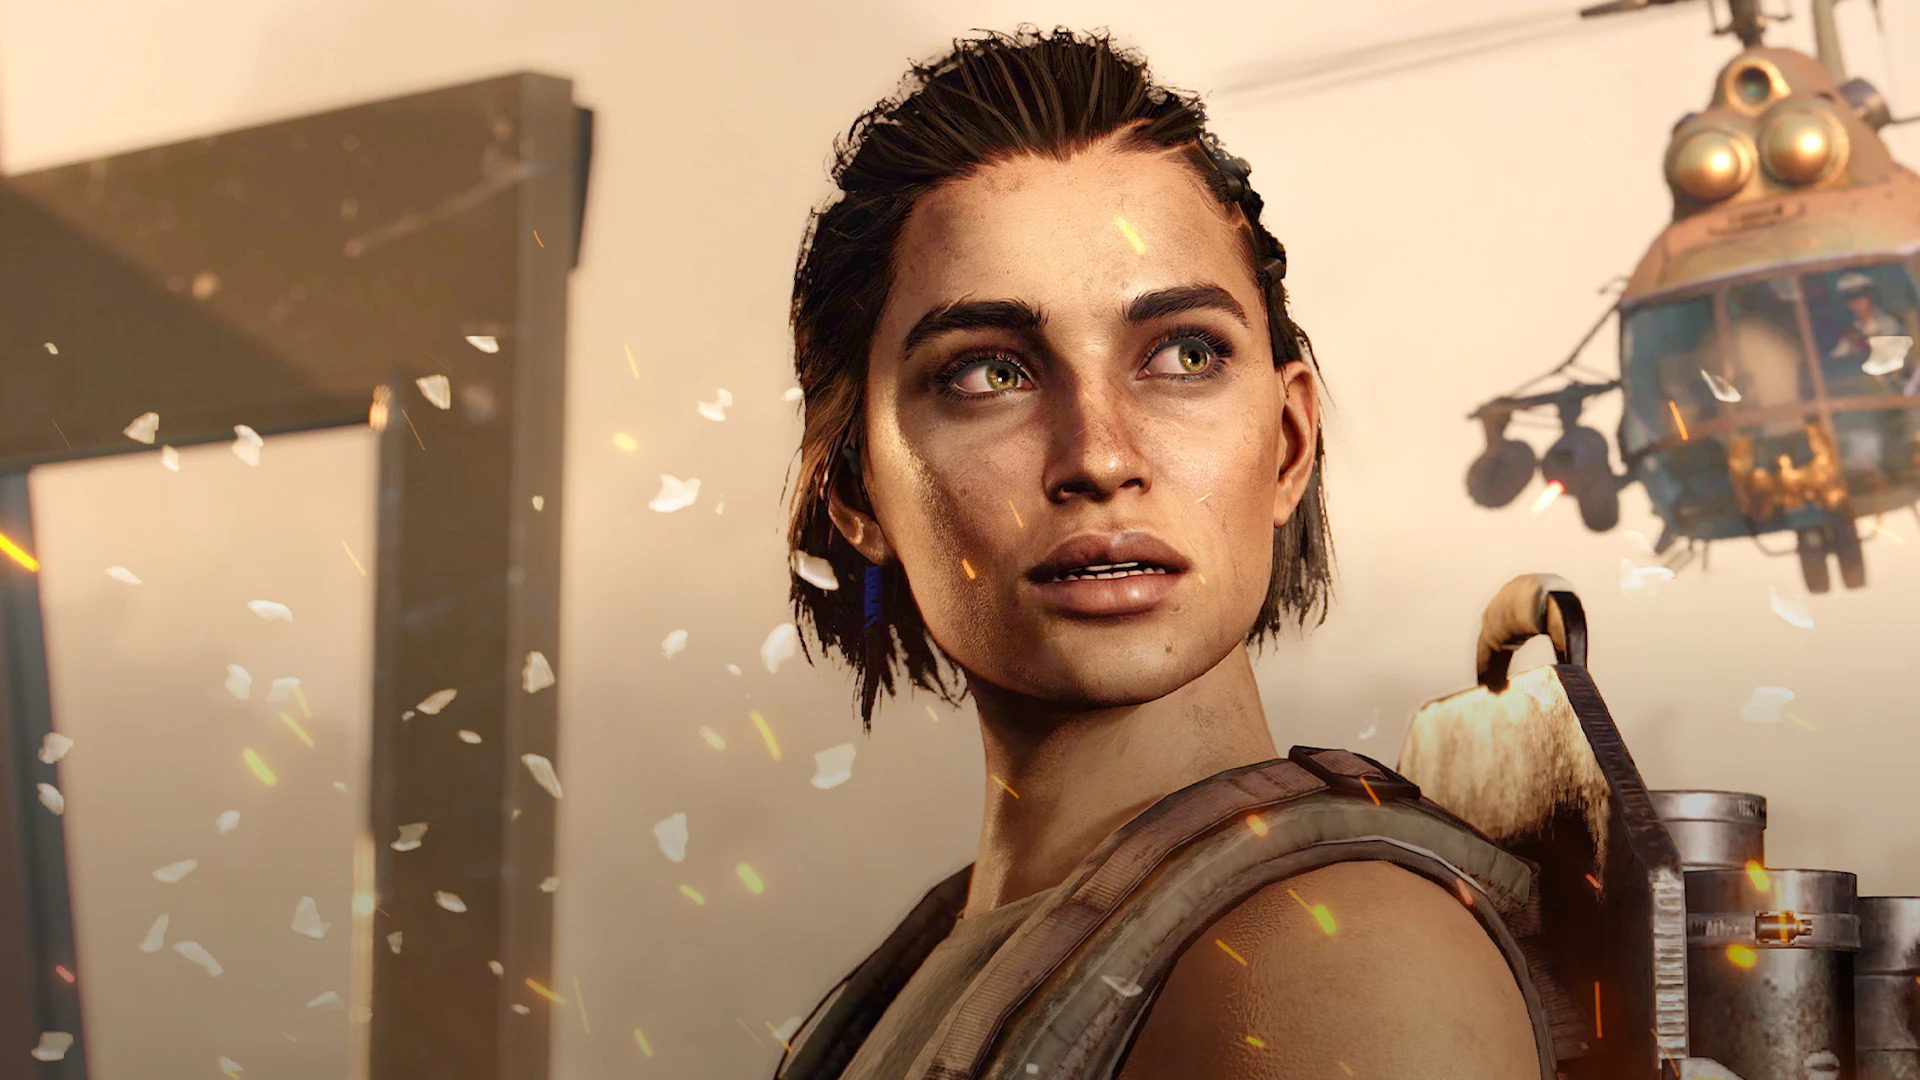 How Far Cry 6 Handles The Choice Of Dani Rojas' Gender Was Important T...